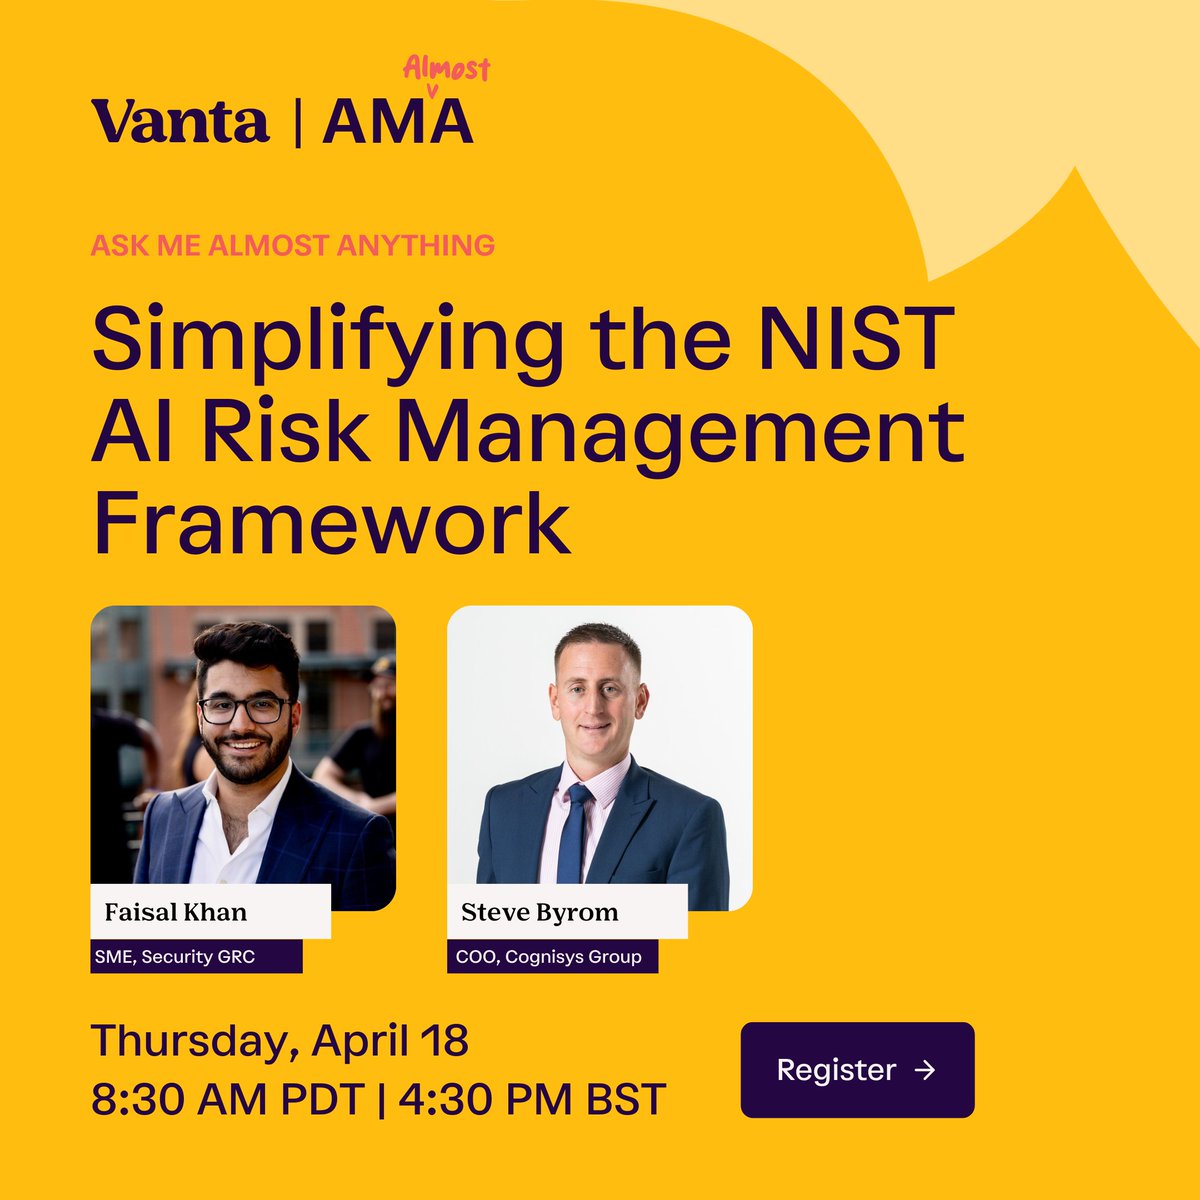 🚀 Dive deep into AI risk management by joining our webinar Thursday, April 18 at 8:30 AM PDT — where we'll unpack the intricacies of the NIST AI Risk Management Framework and answer your questions live. Secure your spot now! ow.ly/torg50R7Gqx